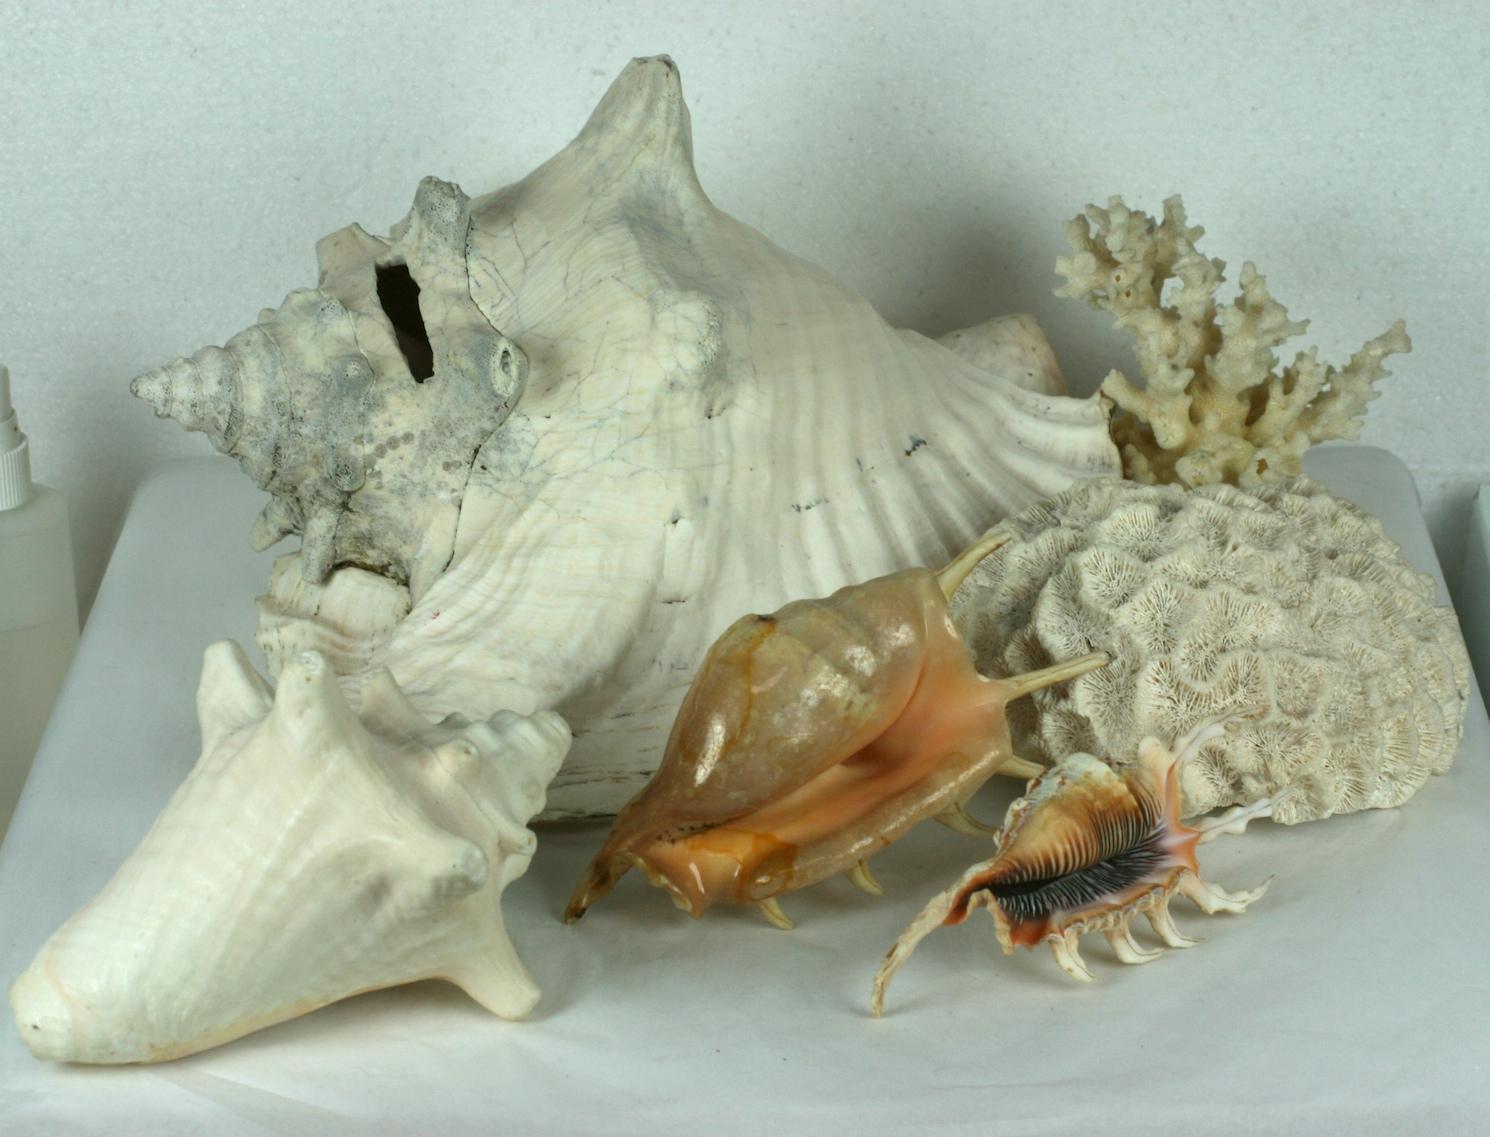 Lovely Assortment of Decorative Shells of all species including Queen, spider conchs, brain and branch coral, all great for decorative use. Small natural losses but overall very nice condition.